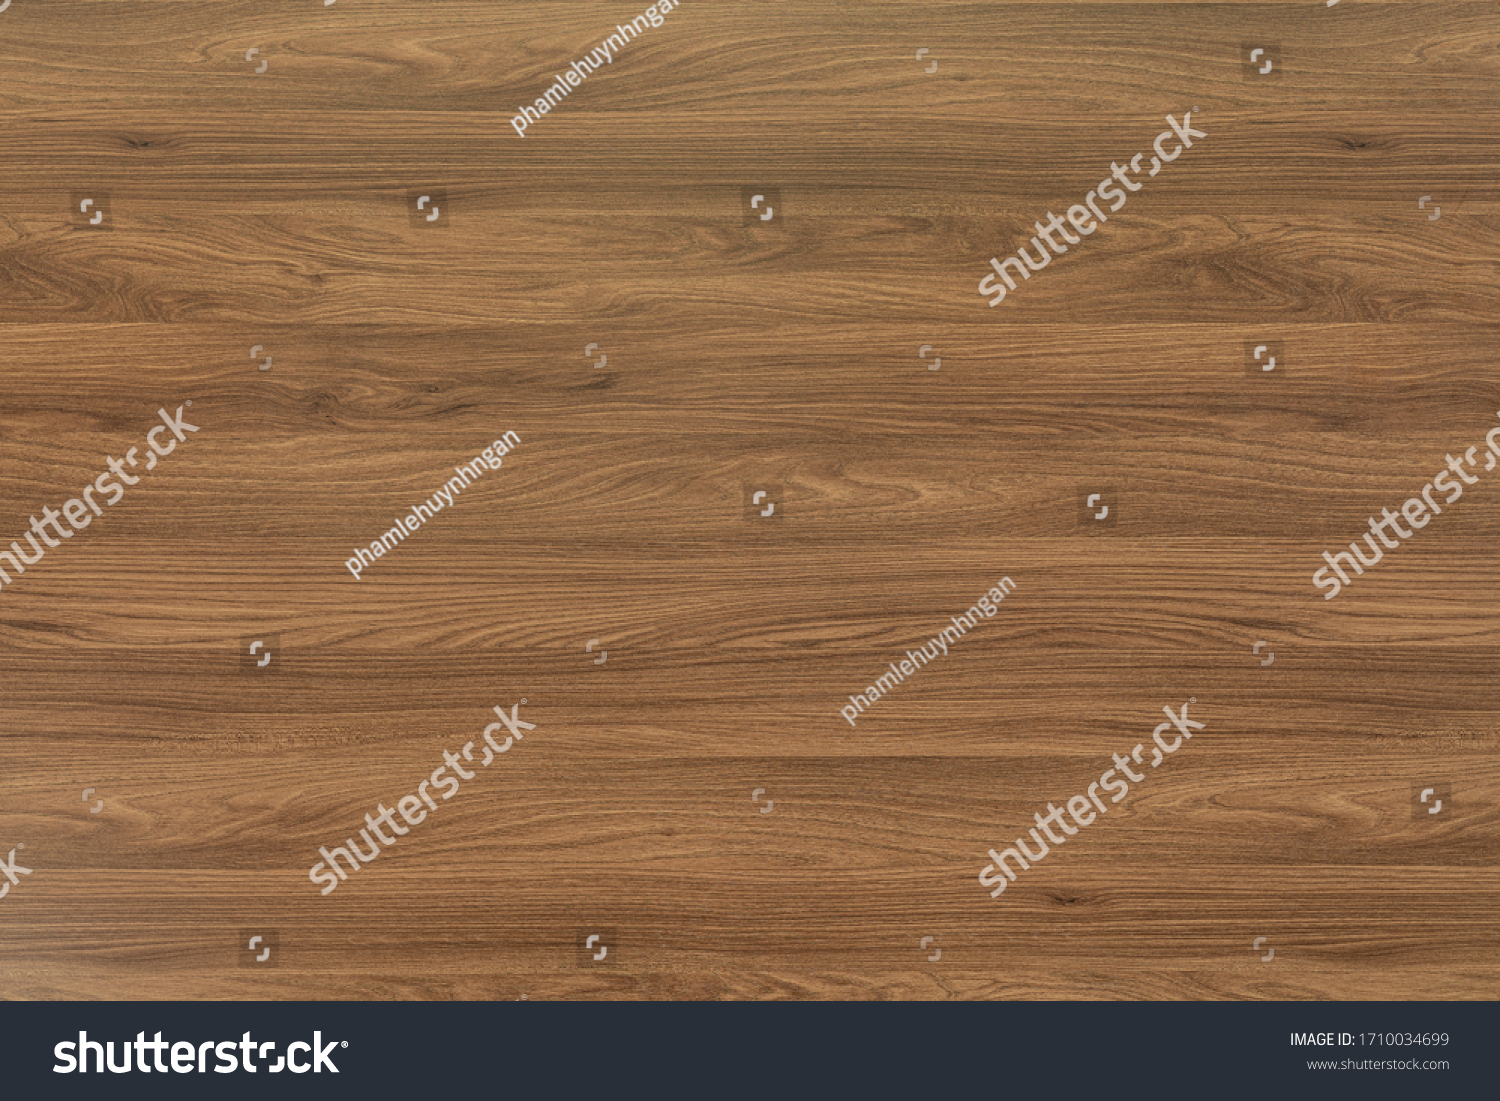 Wood texture, wooden abstract background, raw wood texture seamless #1710034699